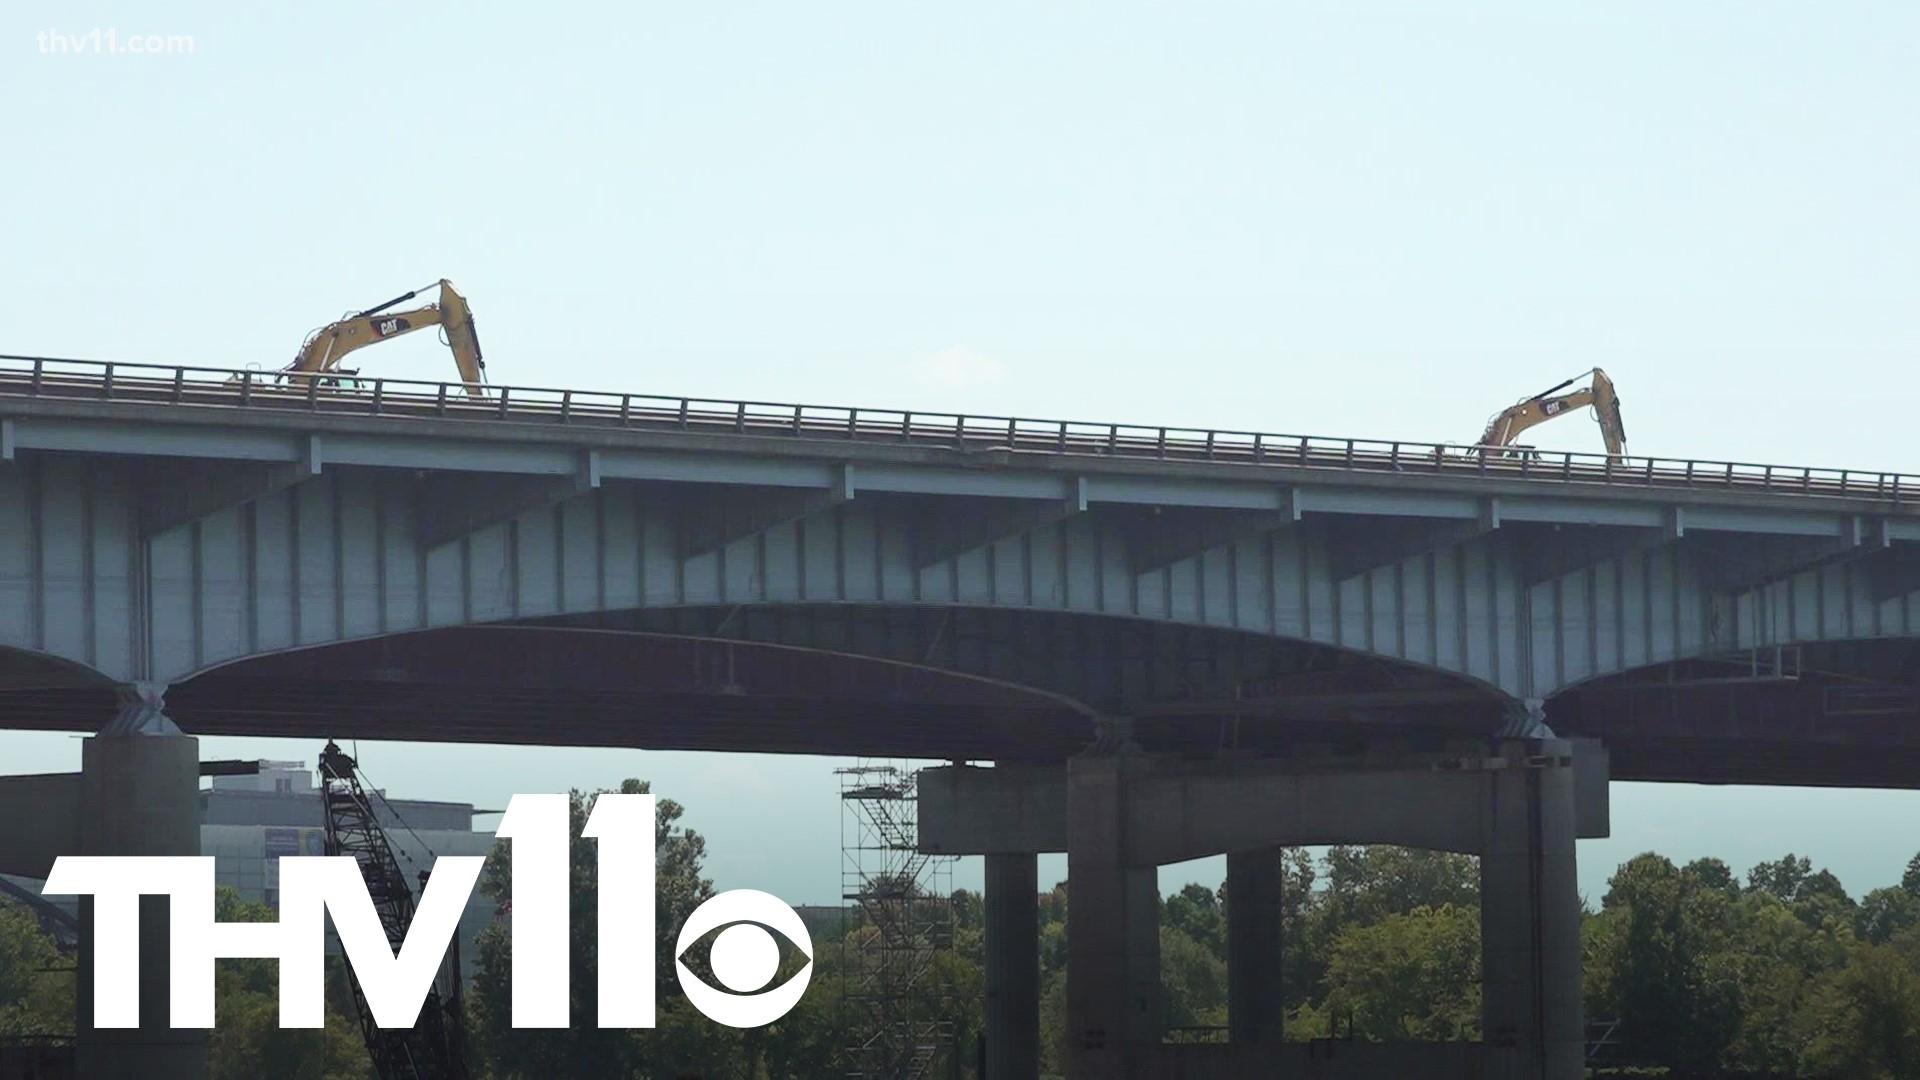 Progress is being made, as construction crews began the demolition of the existing Arkansas River Bridge on Monday.